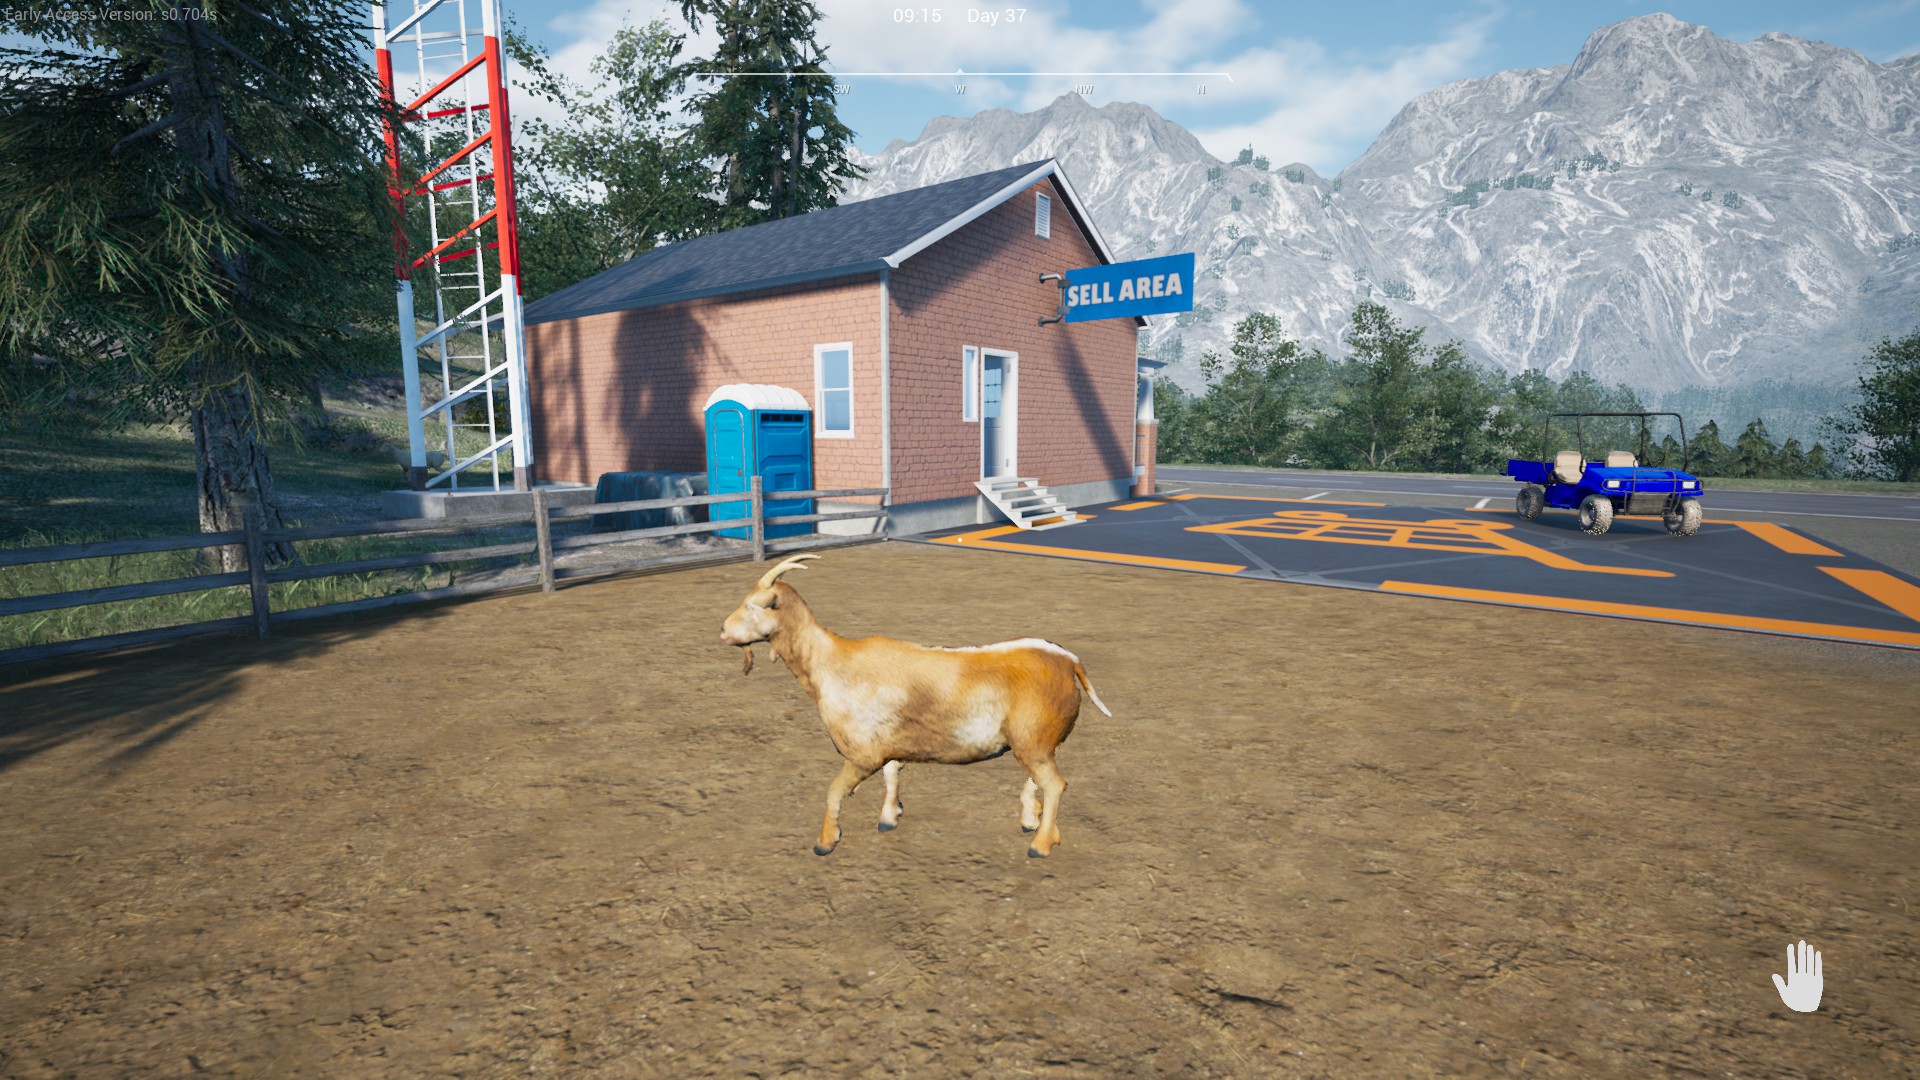 Ranch Simulator Preview - Home, Home on the Range - Previews